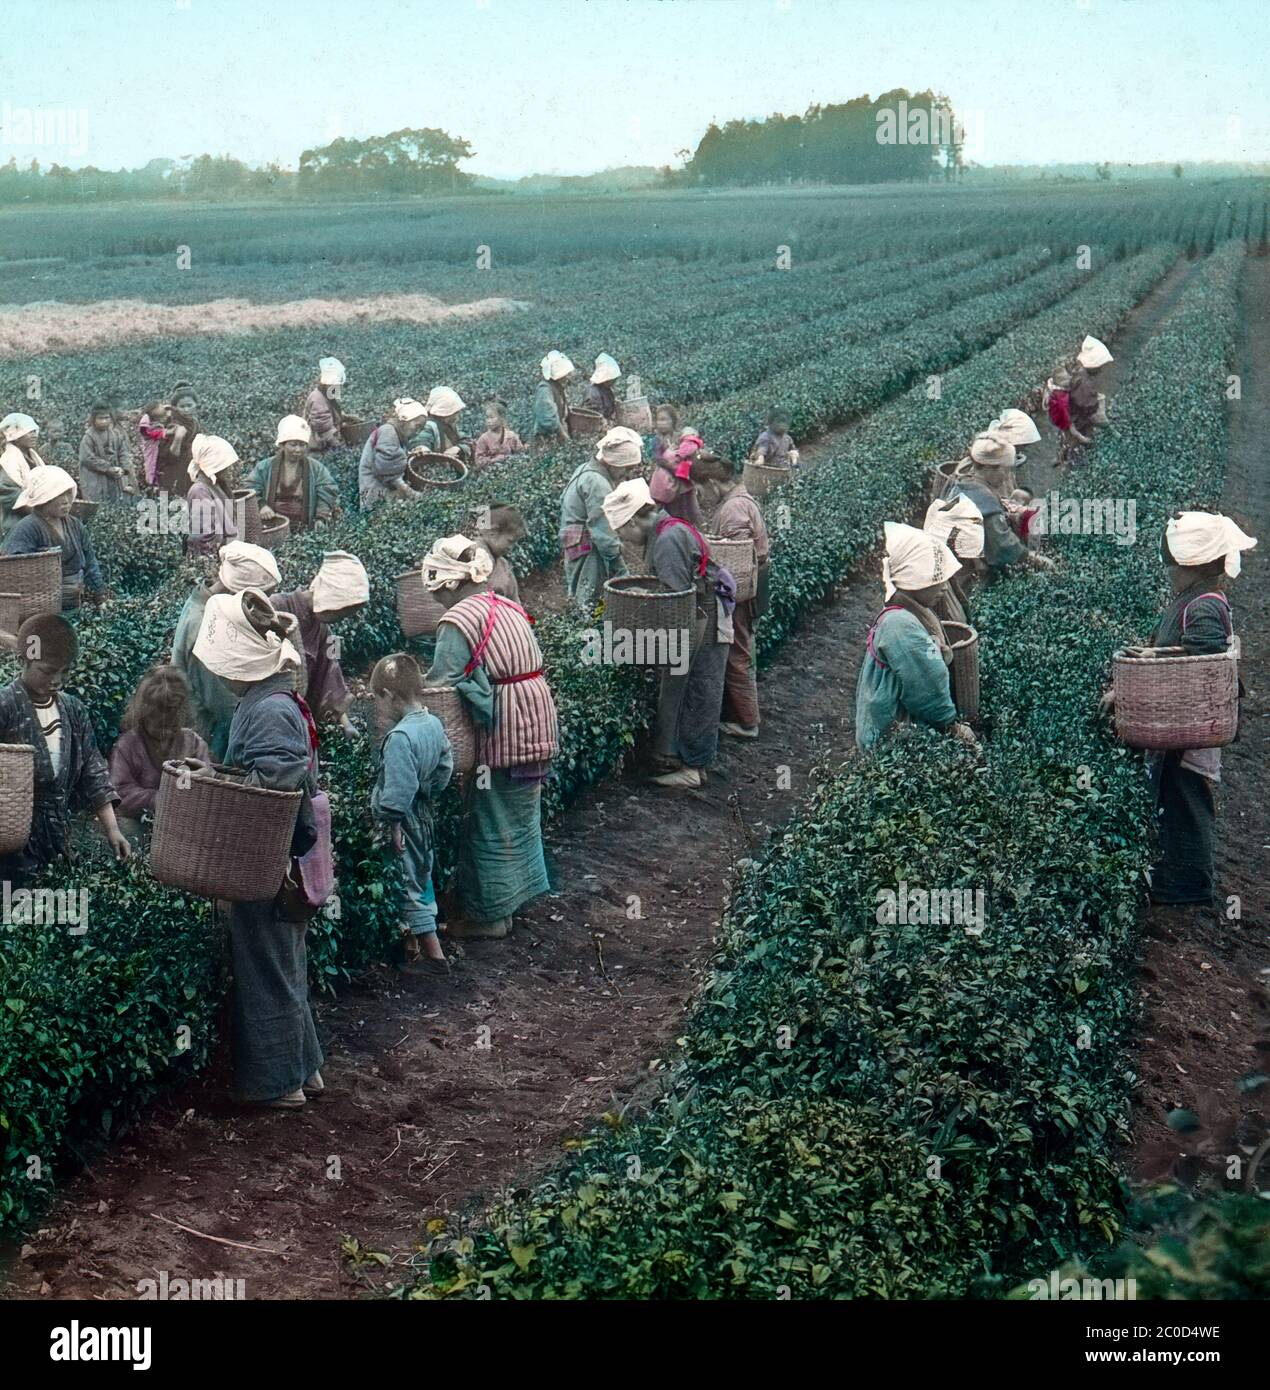 [ 1900s Japan - Japanese Tea Pickers ] — Tea pickers in kimono, wearing towels on their head and their sleeves pulled with cords, are picking tea leaves at a tea plantation in Uji, Kyoto Prefecture.  20th century vintage glass slide. Stock Photo